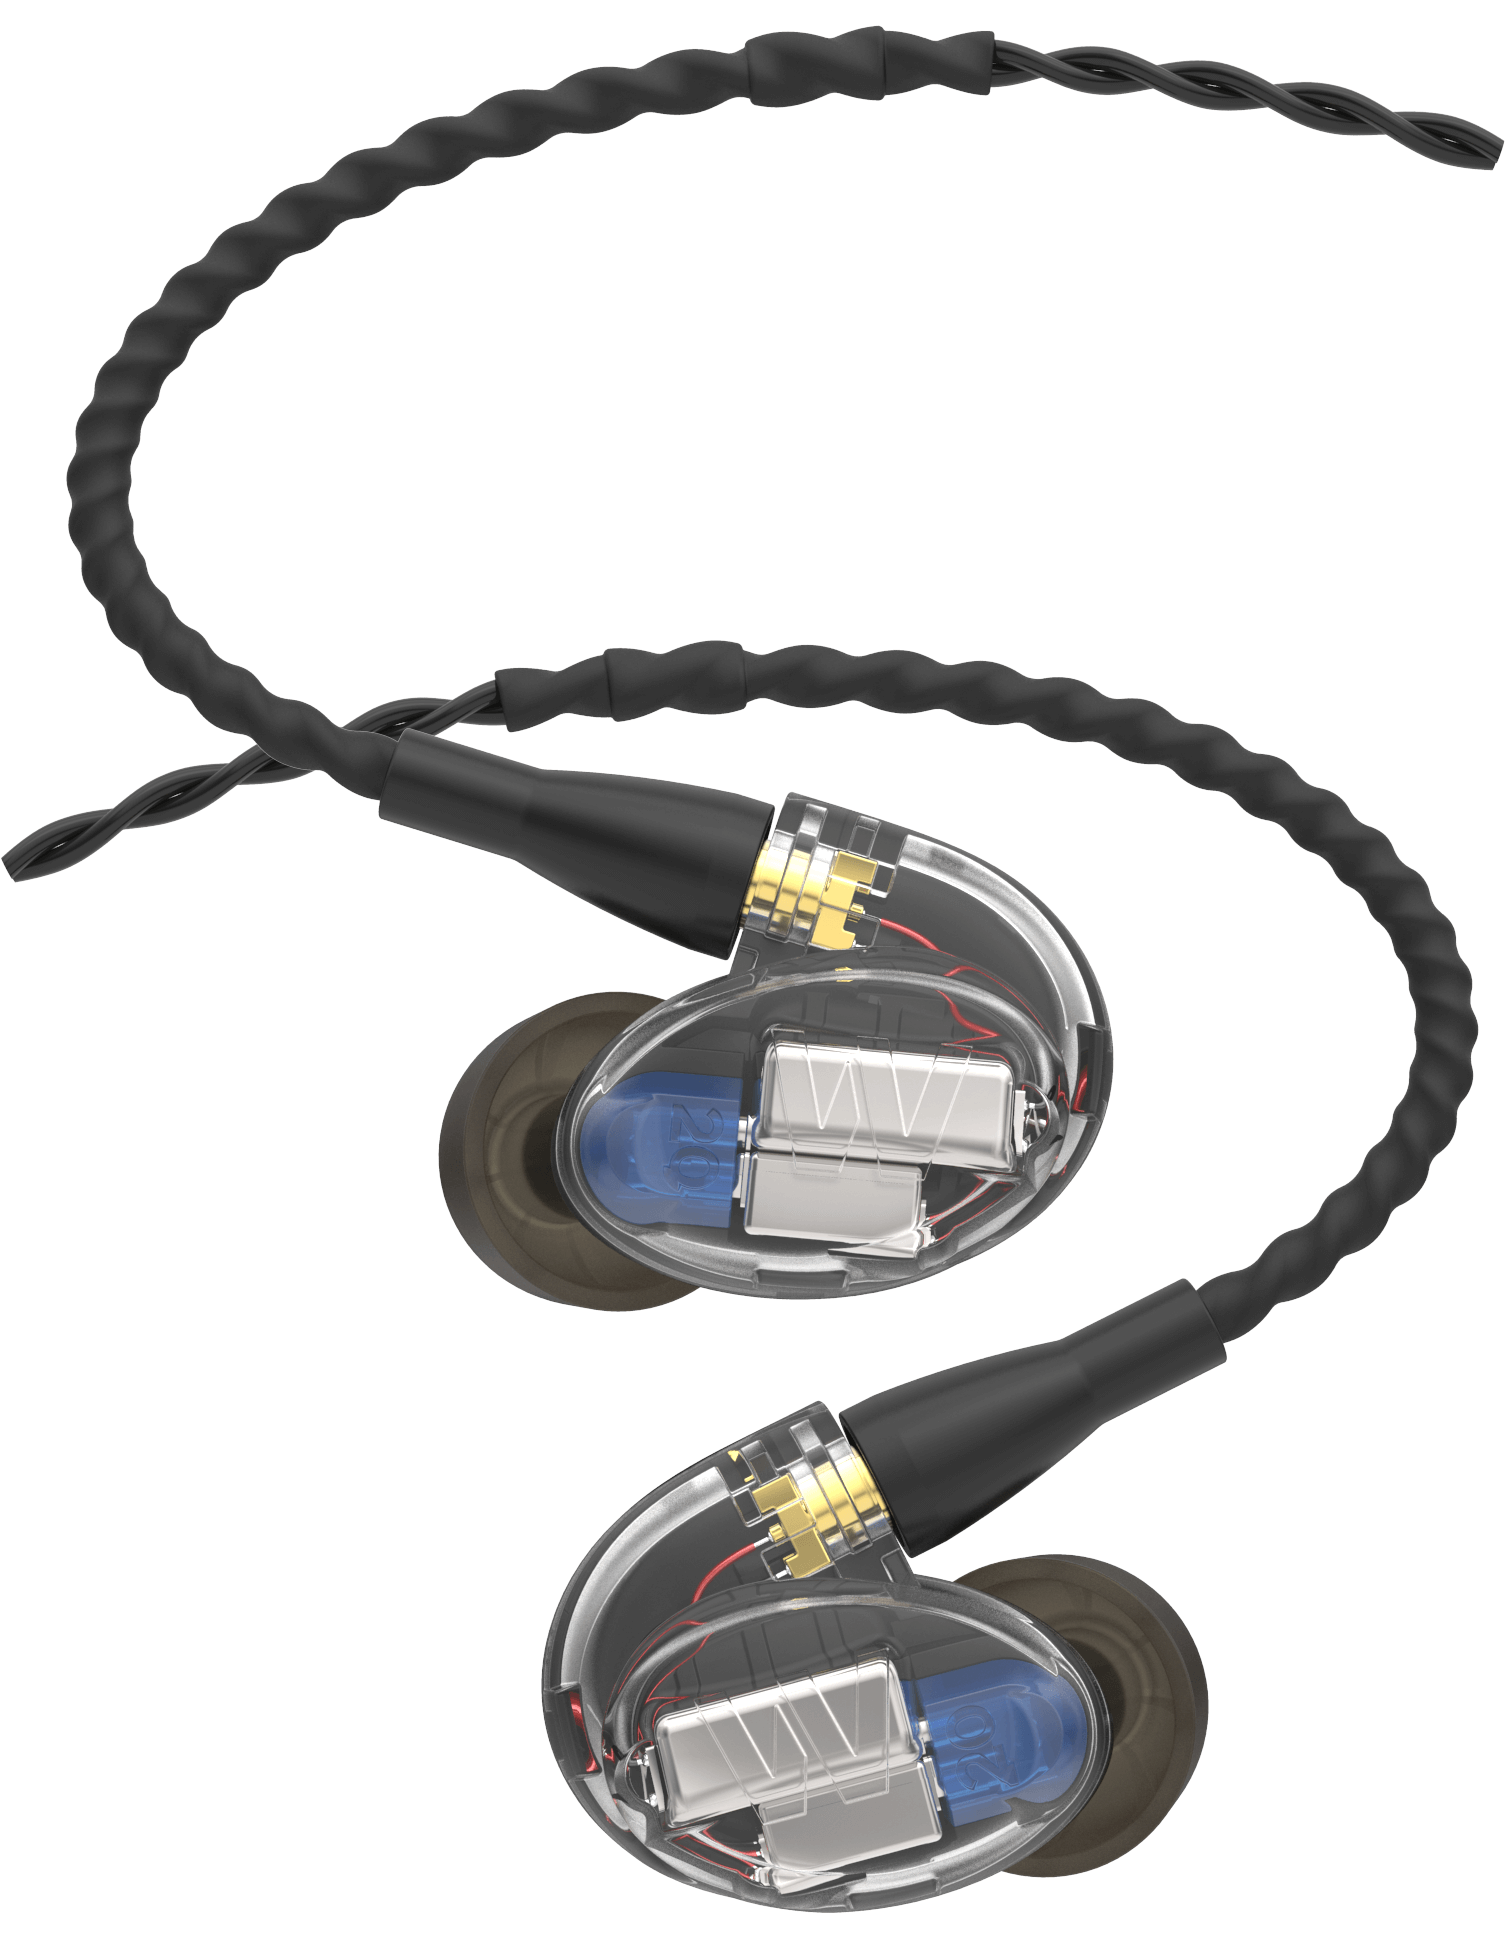 REVIEW: Westone UM Pro 20 In Ear Monitors